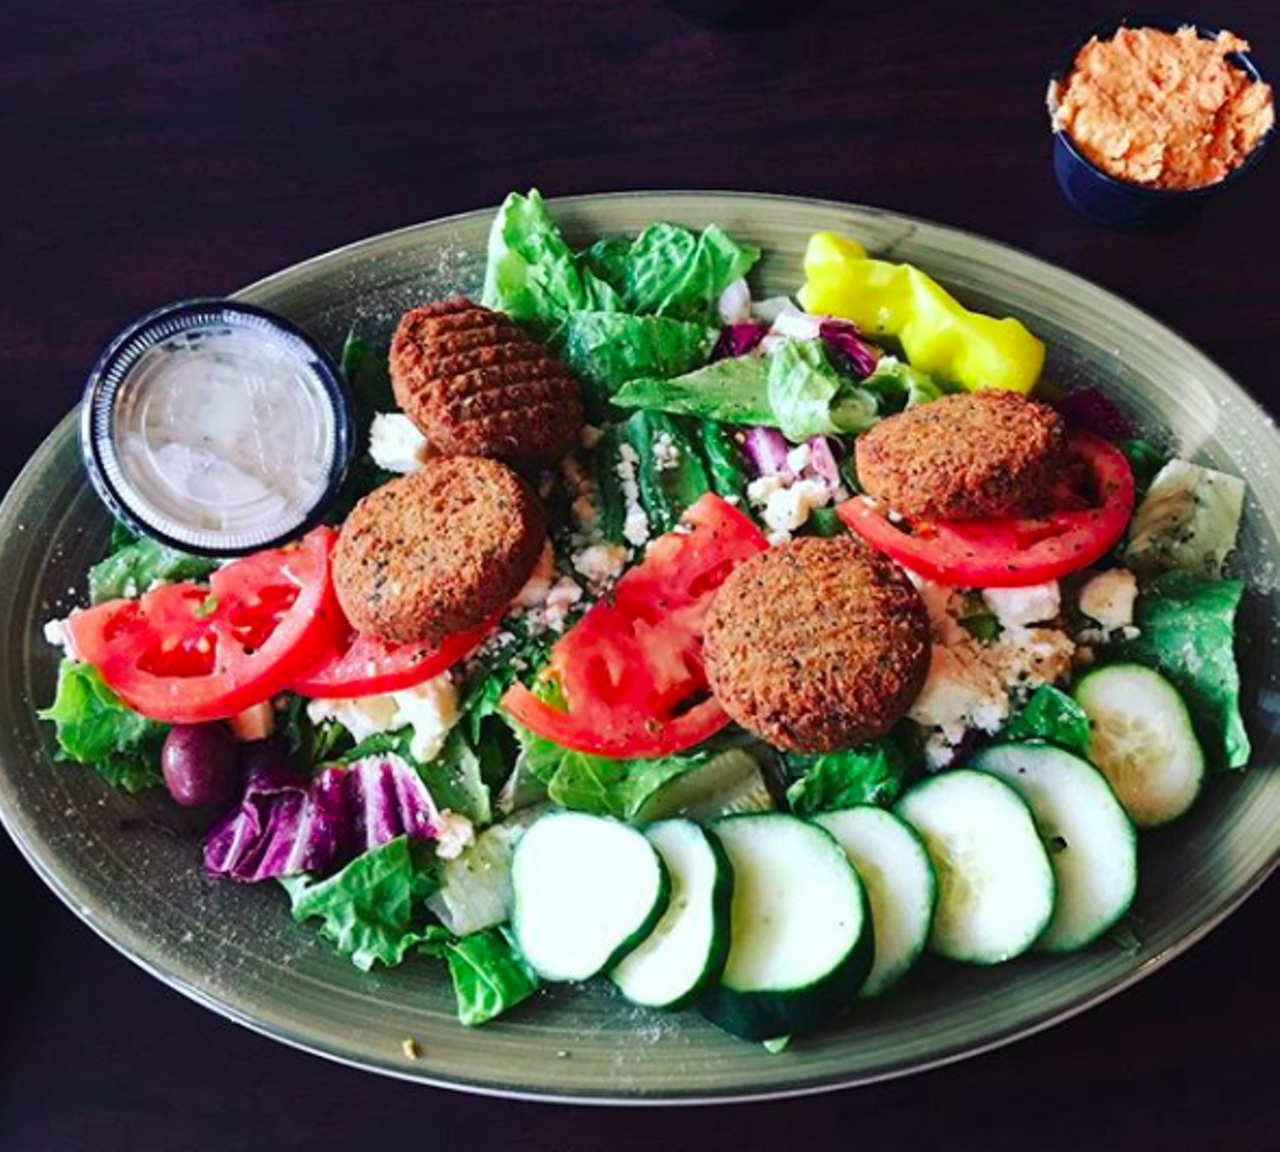 The Forum
Papouli’s Greek Grill
8320 Agora Parkway, Suite 120, (210) 659-2244, papoulis.com
Whether you need a healthy snack or a filling meal to recharge, Papouli’s has got your covered on both fronts. Order some hummus for the table and claim a grilled salmon fillet for yourself to feast without feeling bad.
thekassandrachristine / Instagram